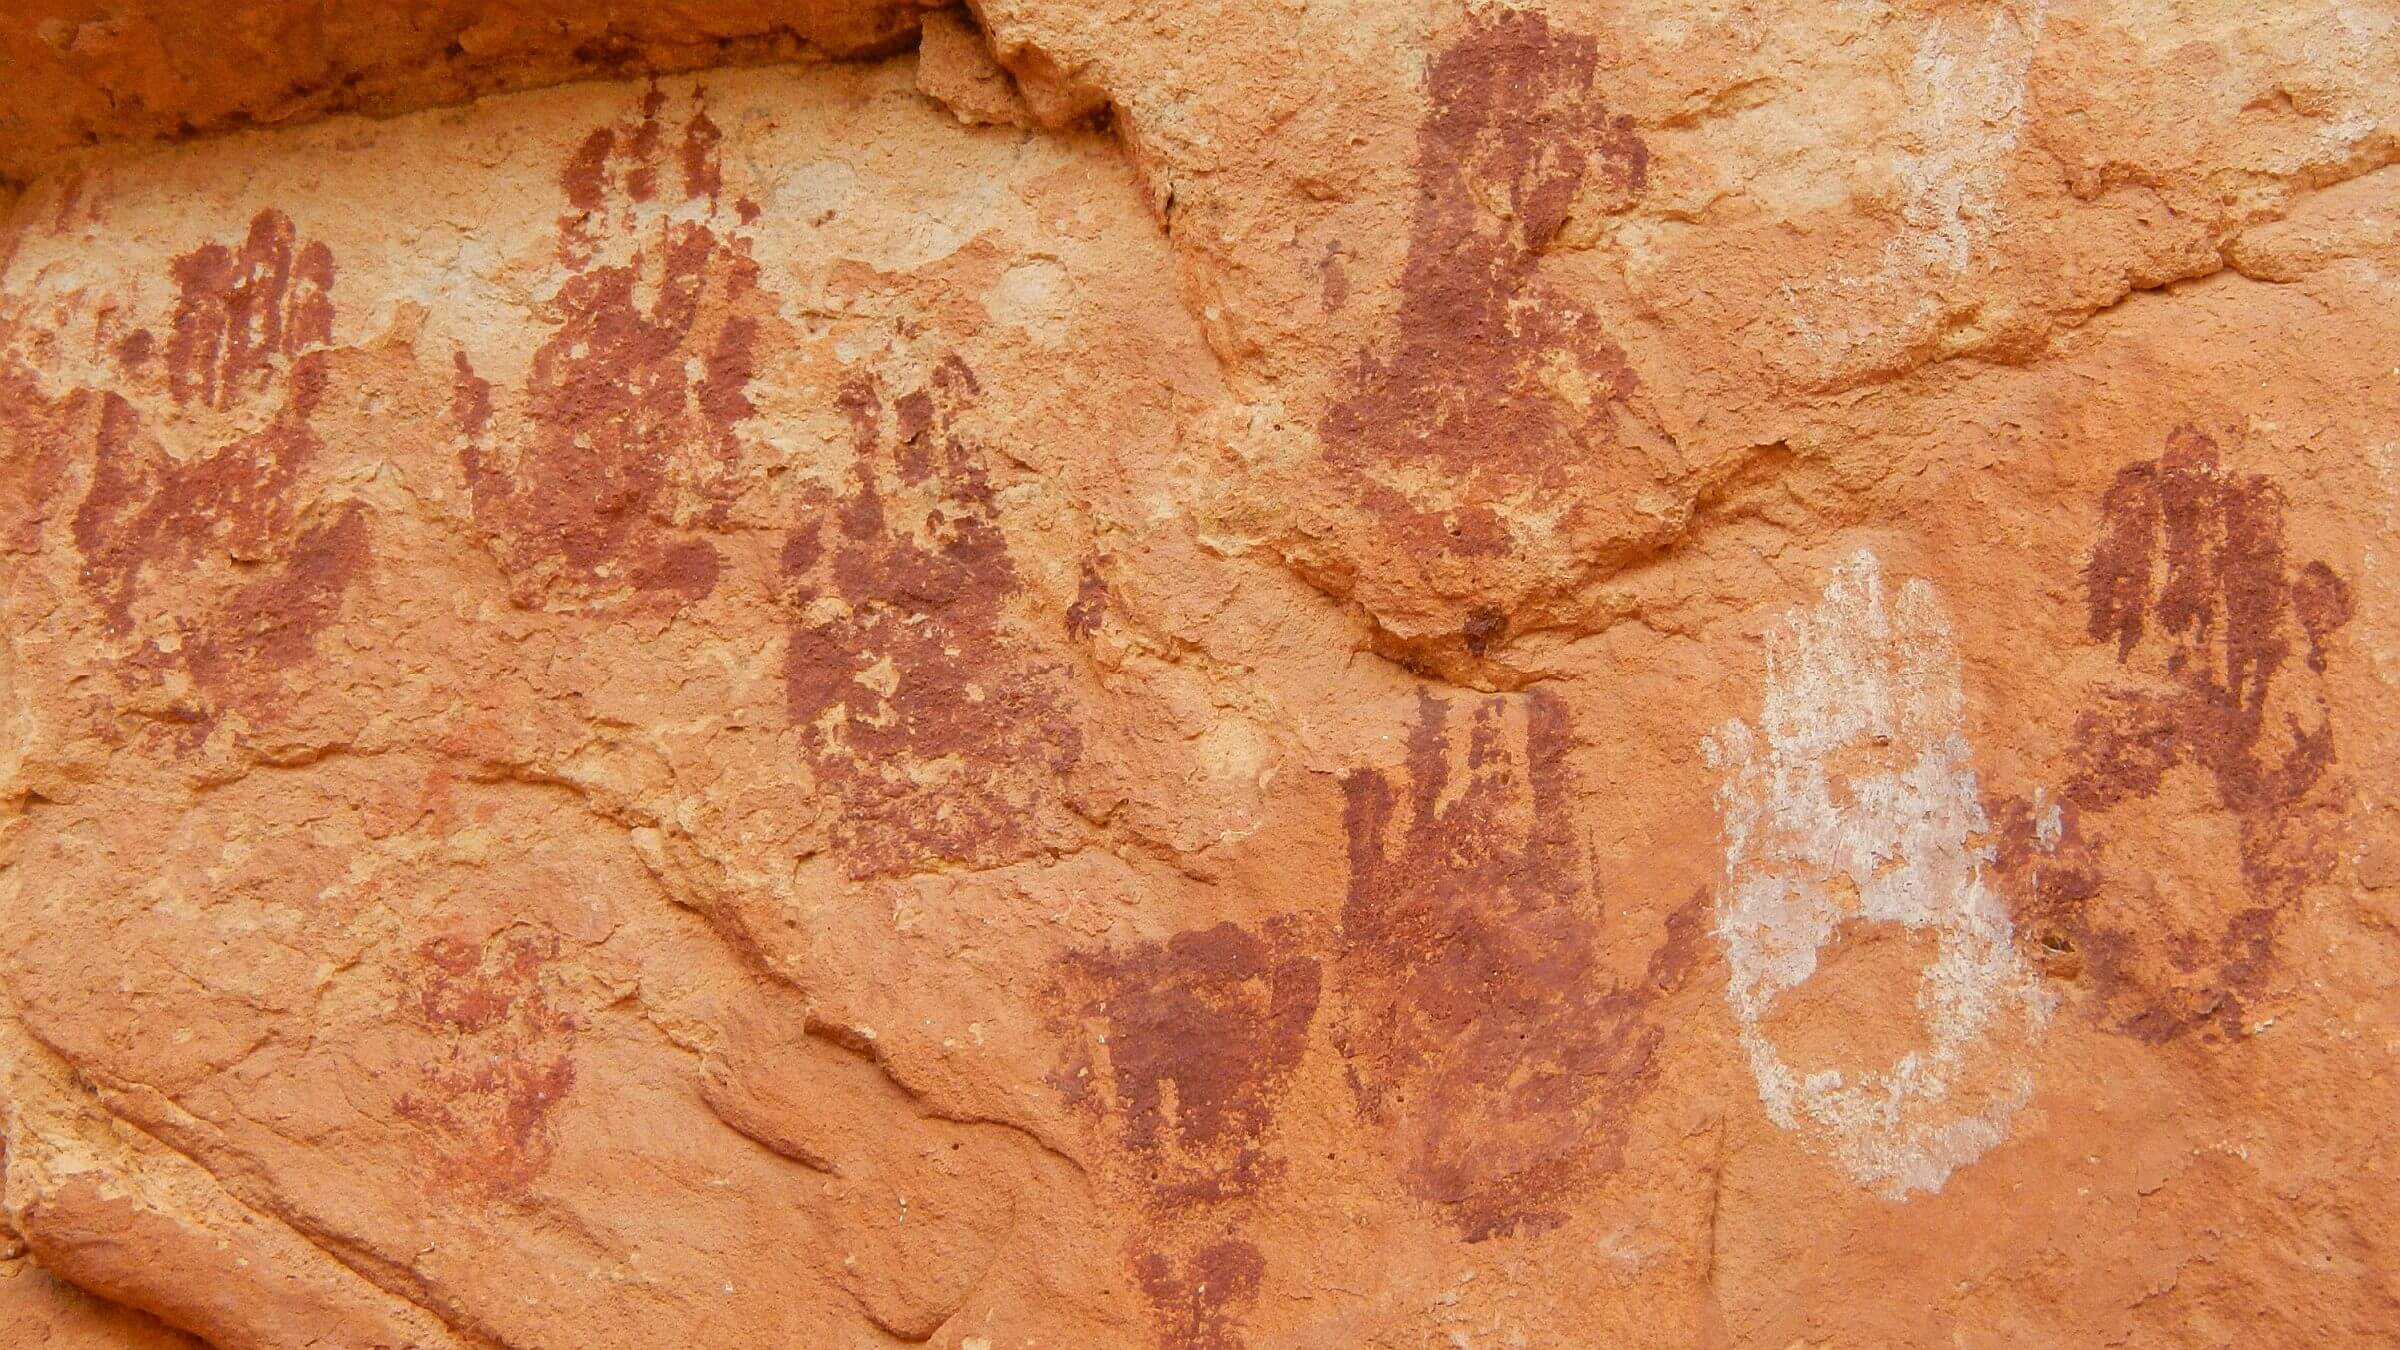 Grand Gulch Wilderness Study Area, red & white hands pictograph, May